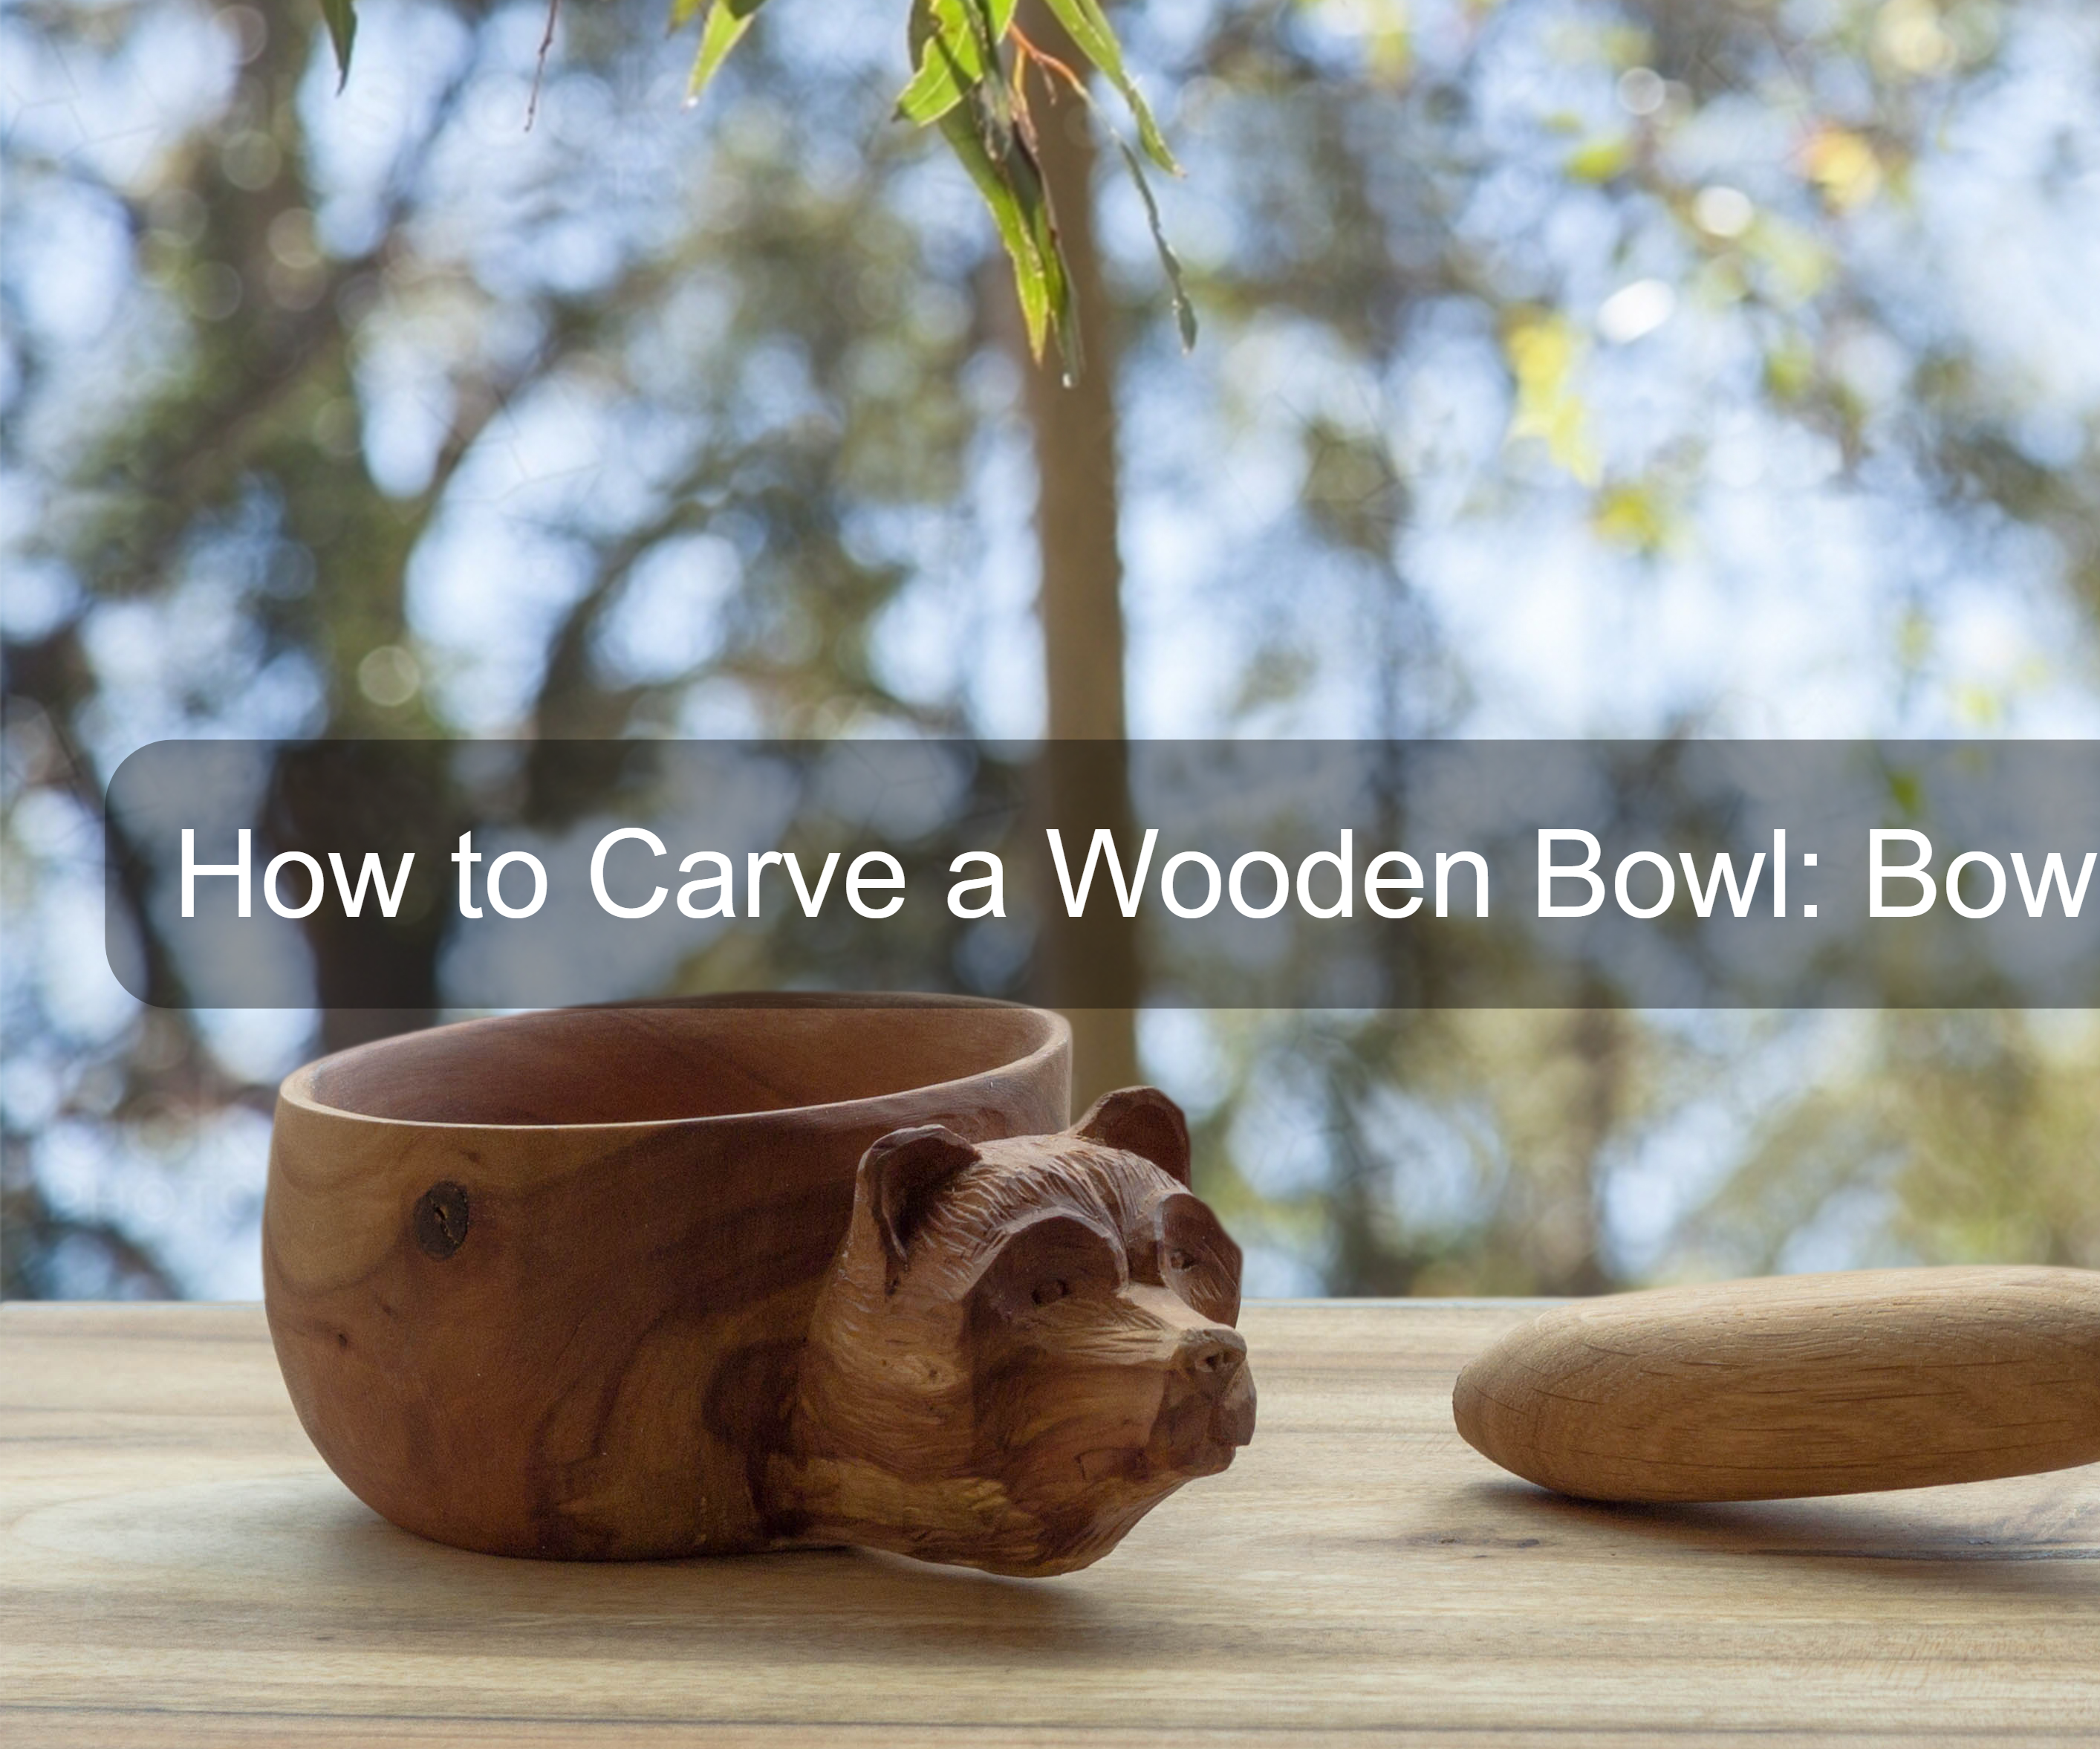 How to Carve a Wooden Bowl: Bowl Carving Guide